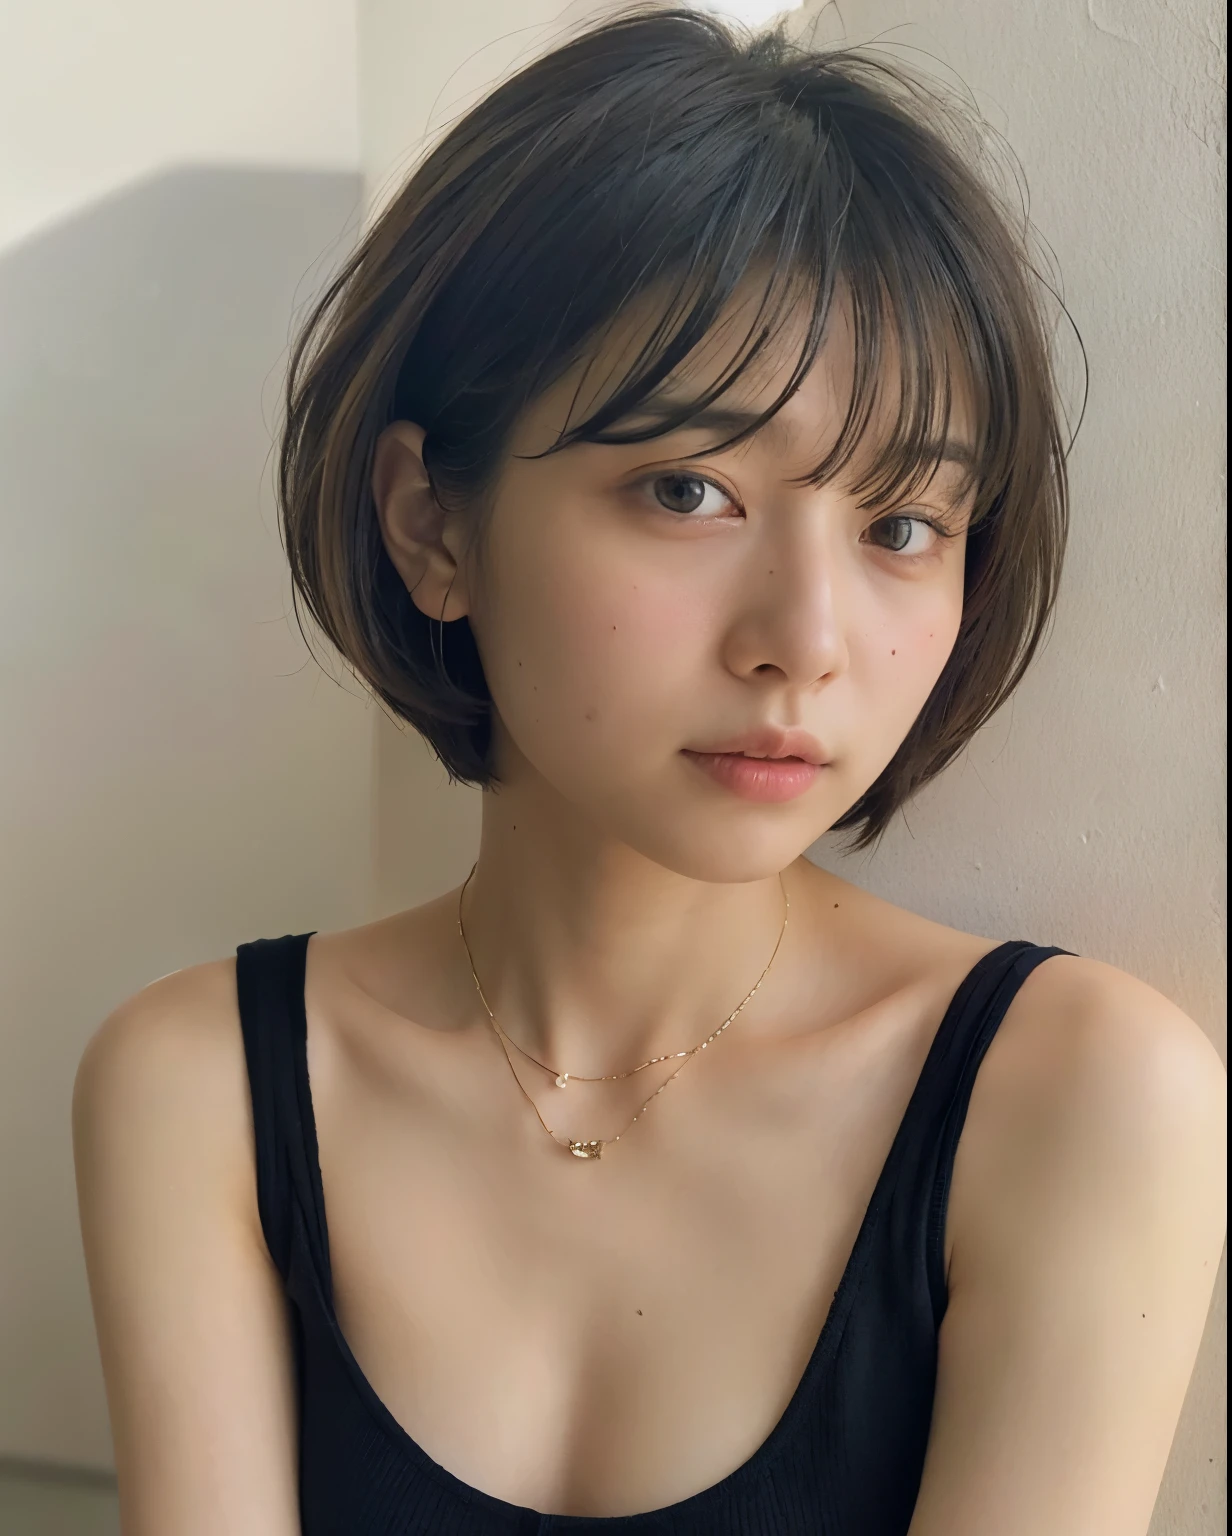 (very realistic photo, concentrated、High resolution, detailed face, fine eyes), ((Taken in front of a white wall))、japanese woman, 20-year-old, various expressions, Upper body、alone:1, slim body shape, various hairstyles,black sheer tops、 Only one person is in the photo、Photographed in natural light、simple necklace、bob hair、shortcut、looking at the camera